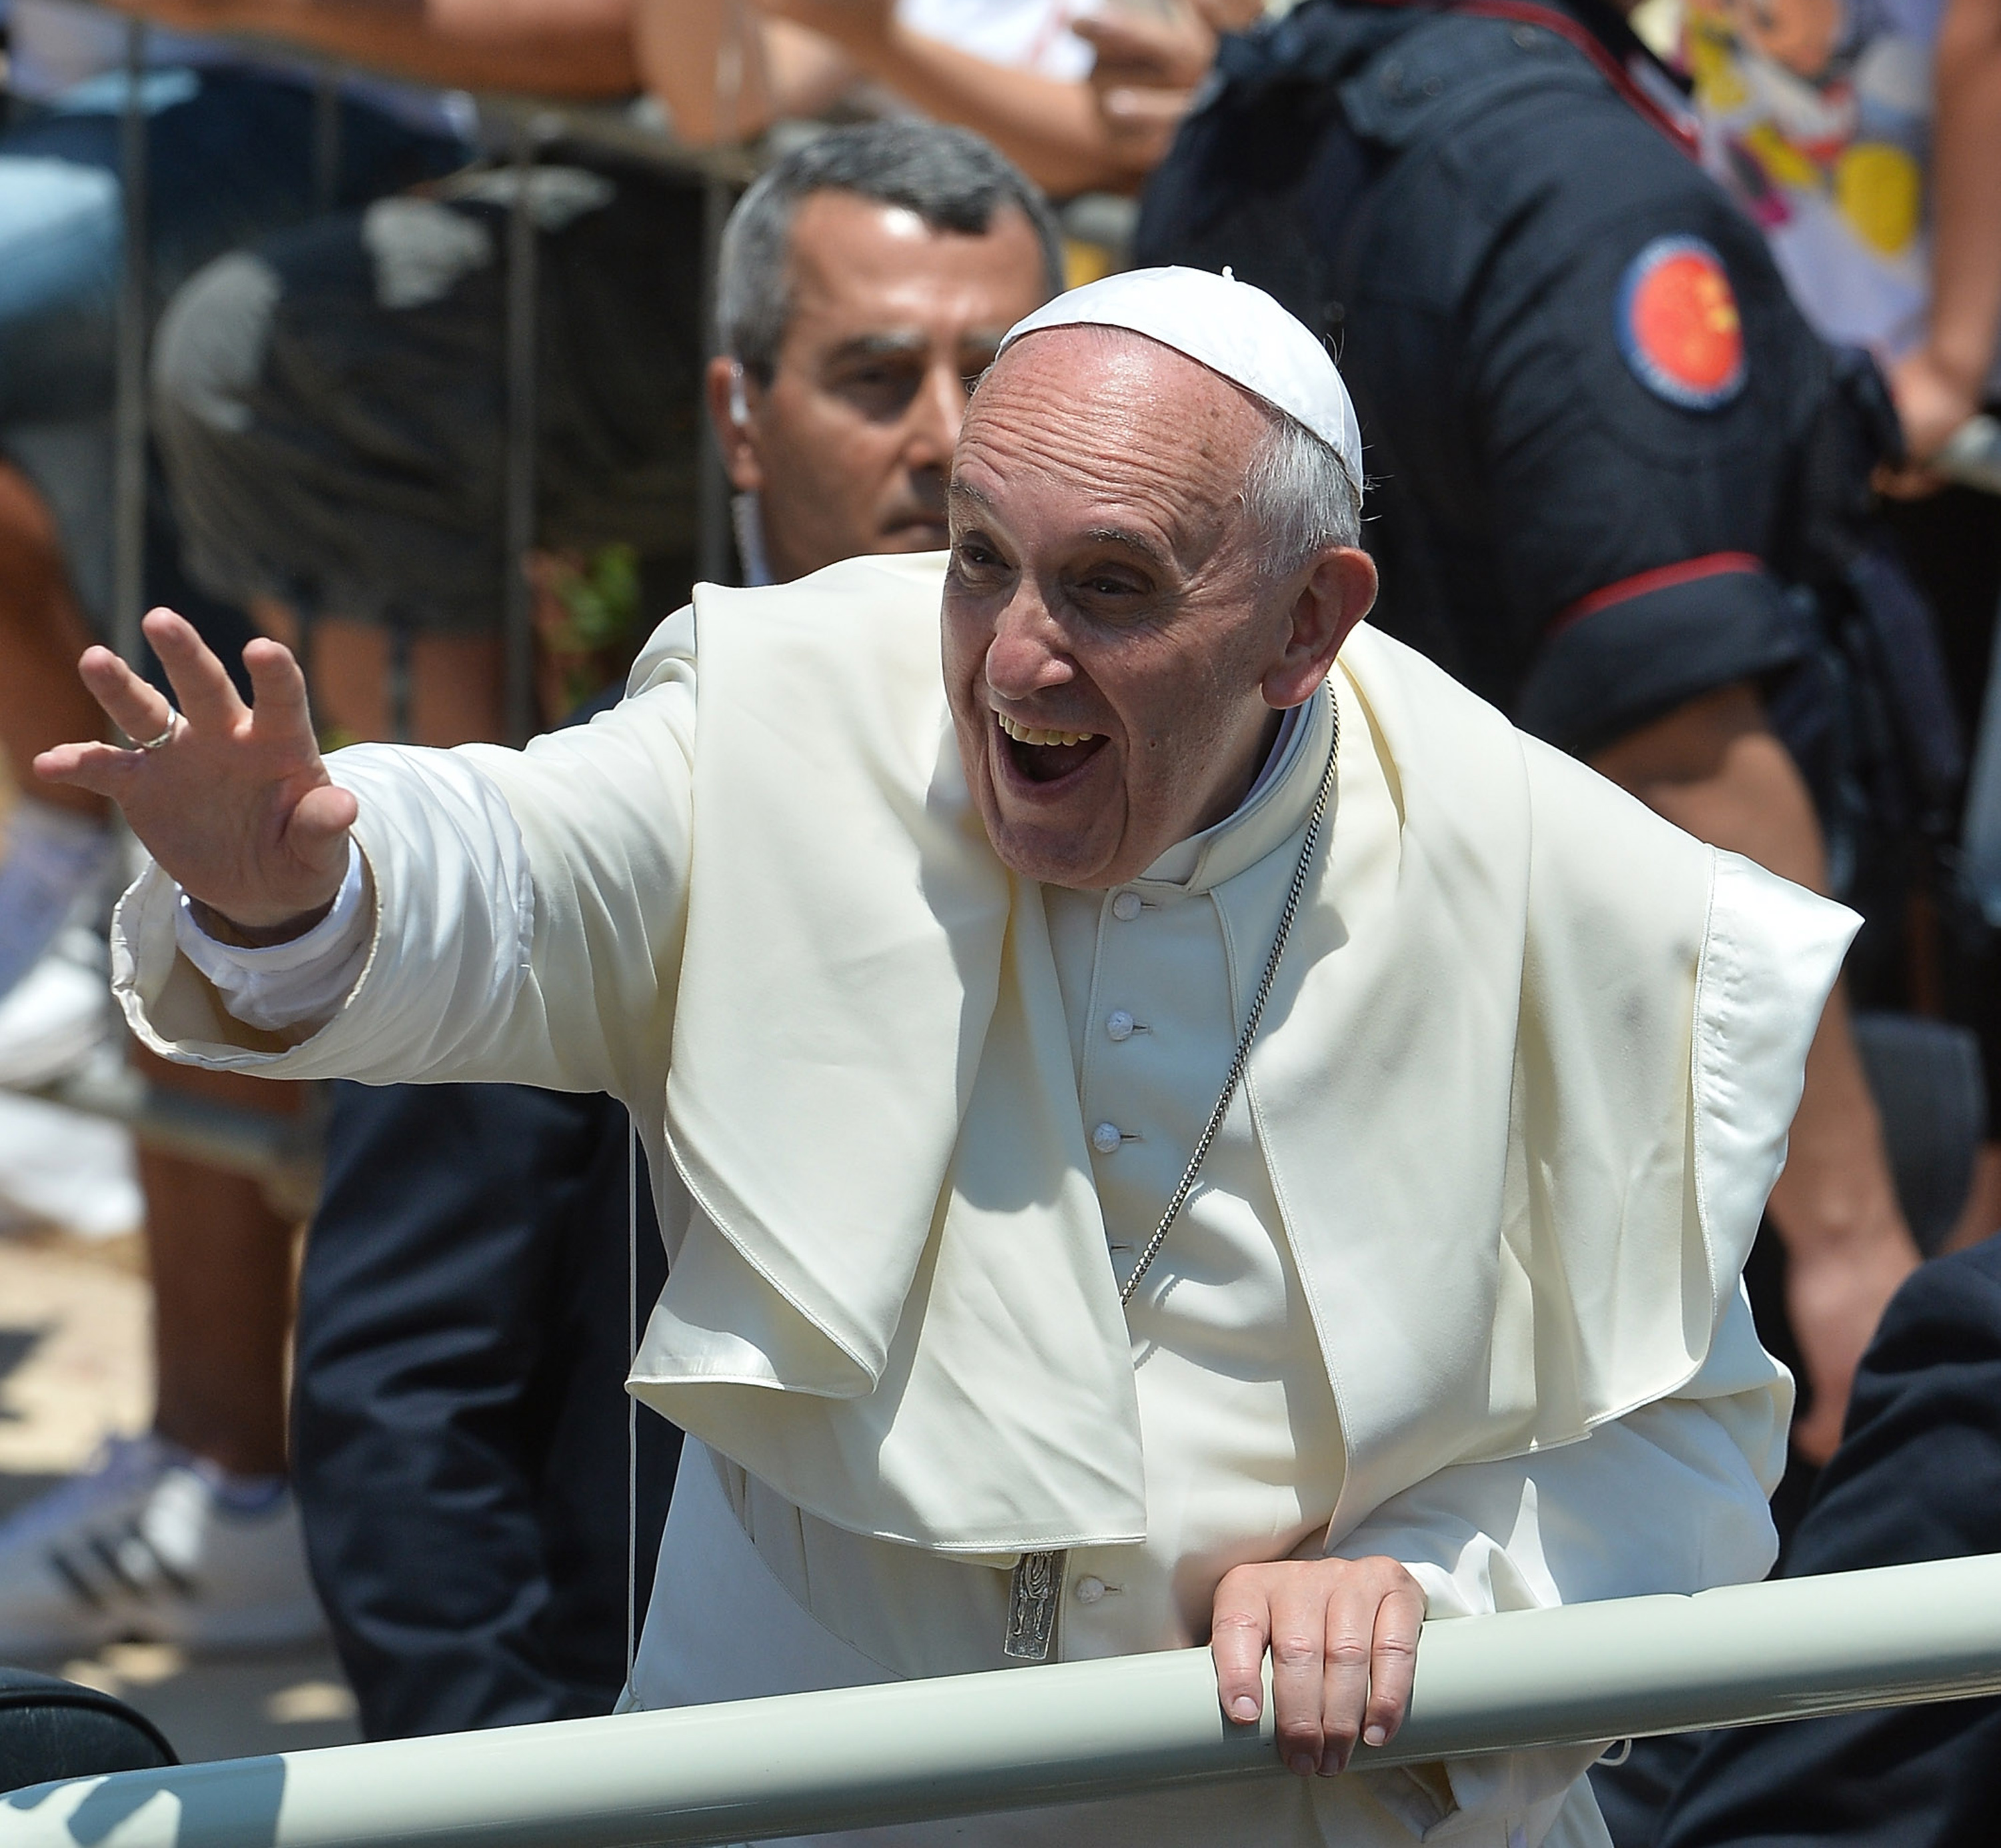 Pope Francis could become the first pontiff ever to address Congress